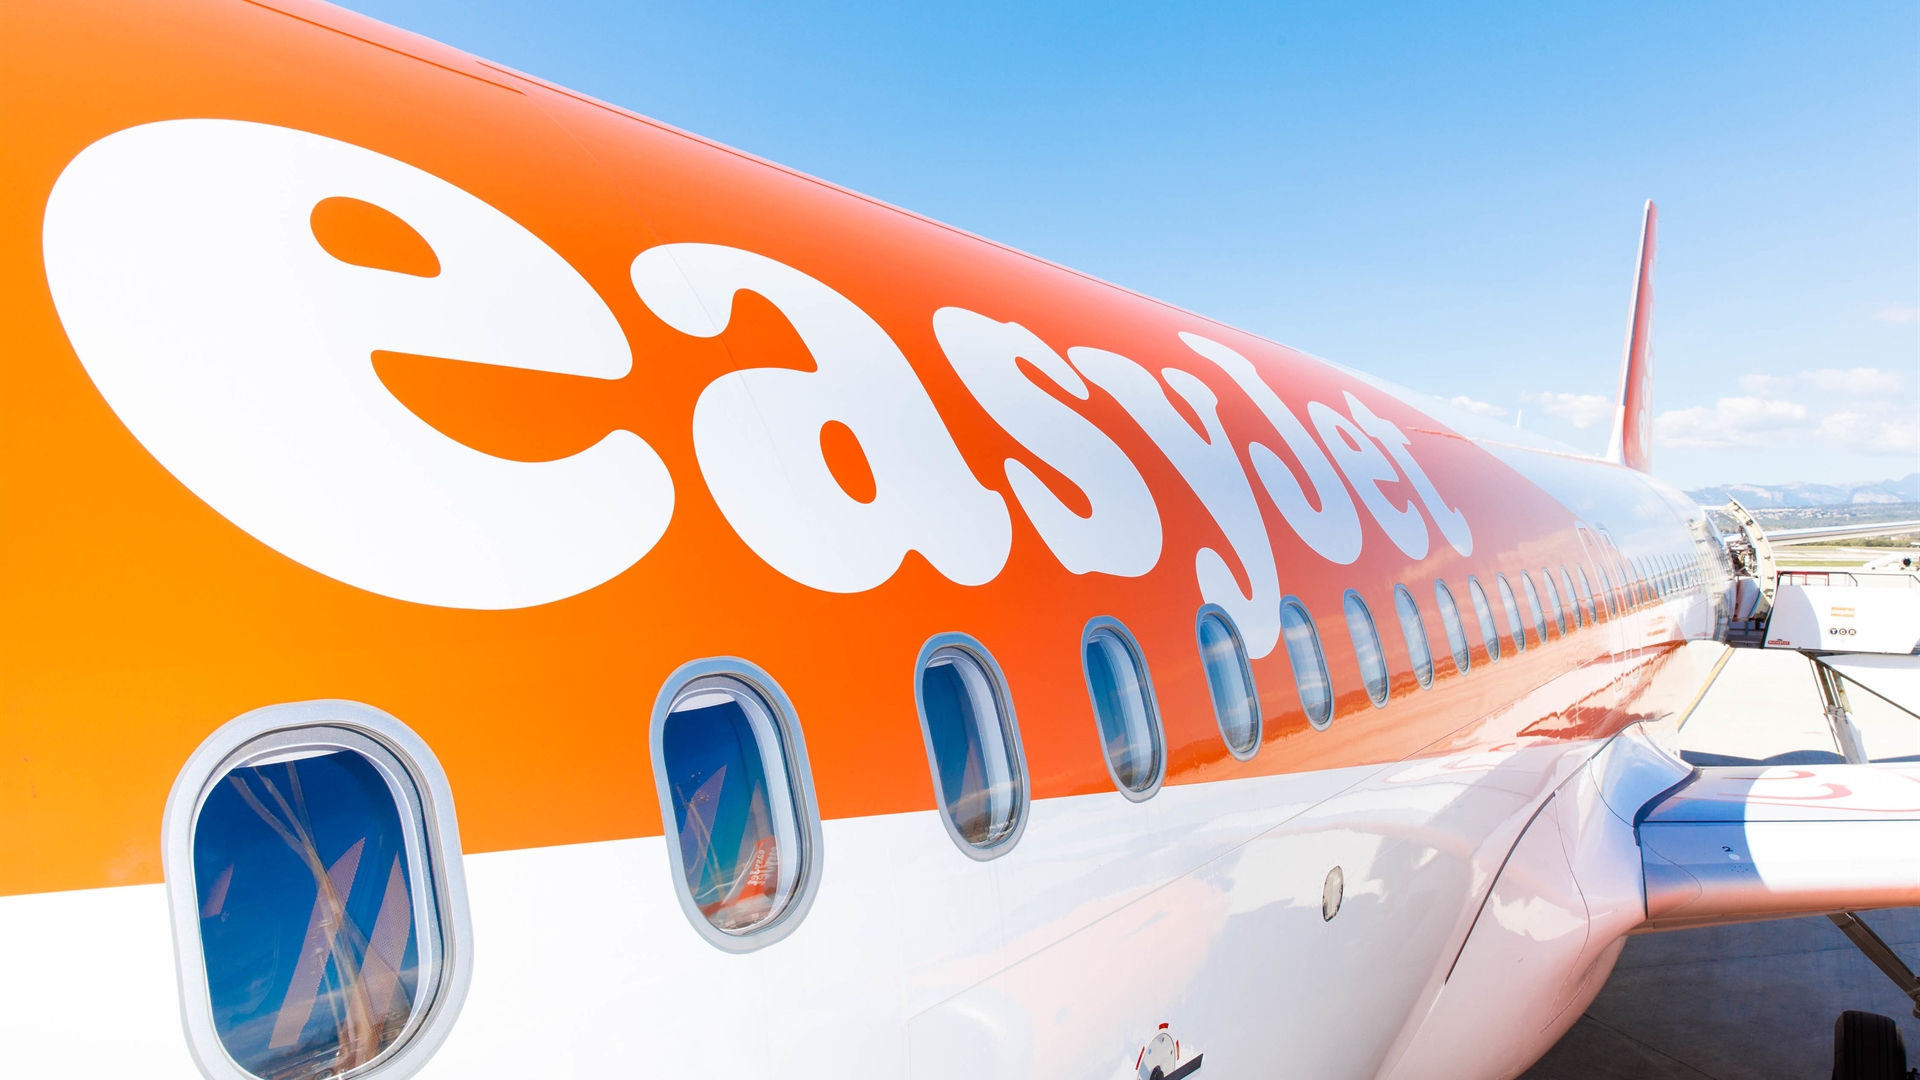 easyJet customers will be invited to arrange their COVID-19 travel testing requirements with Boots